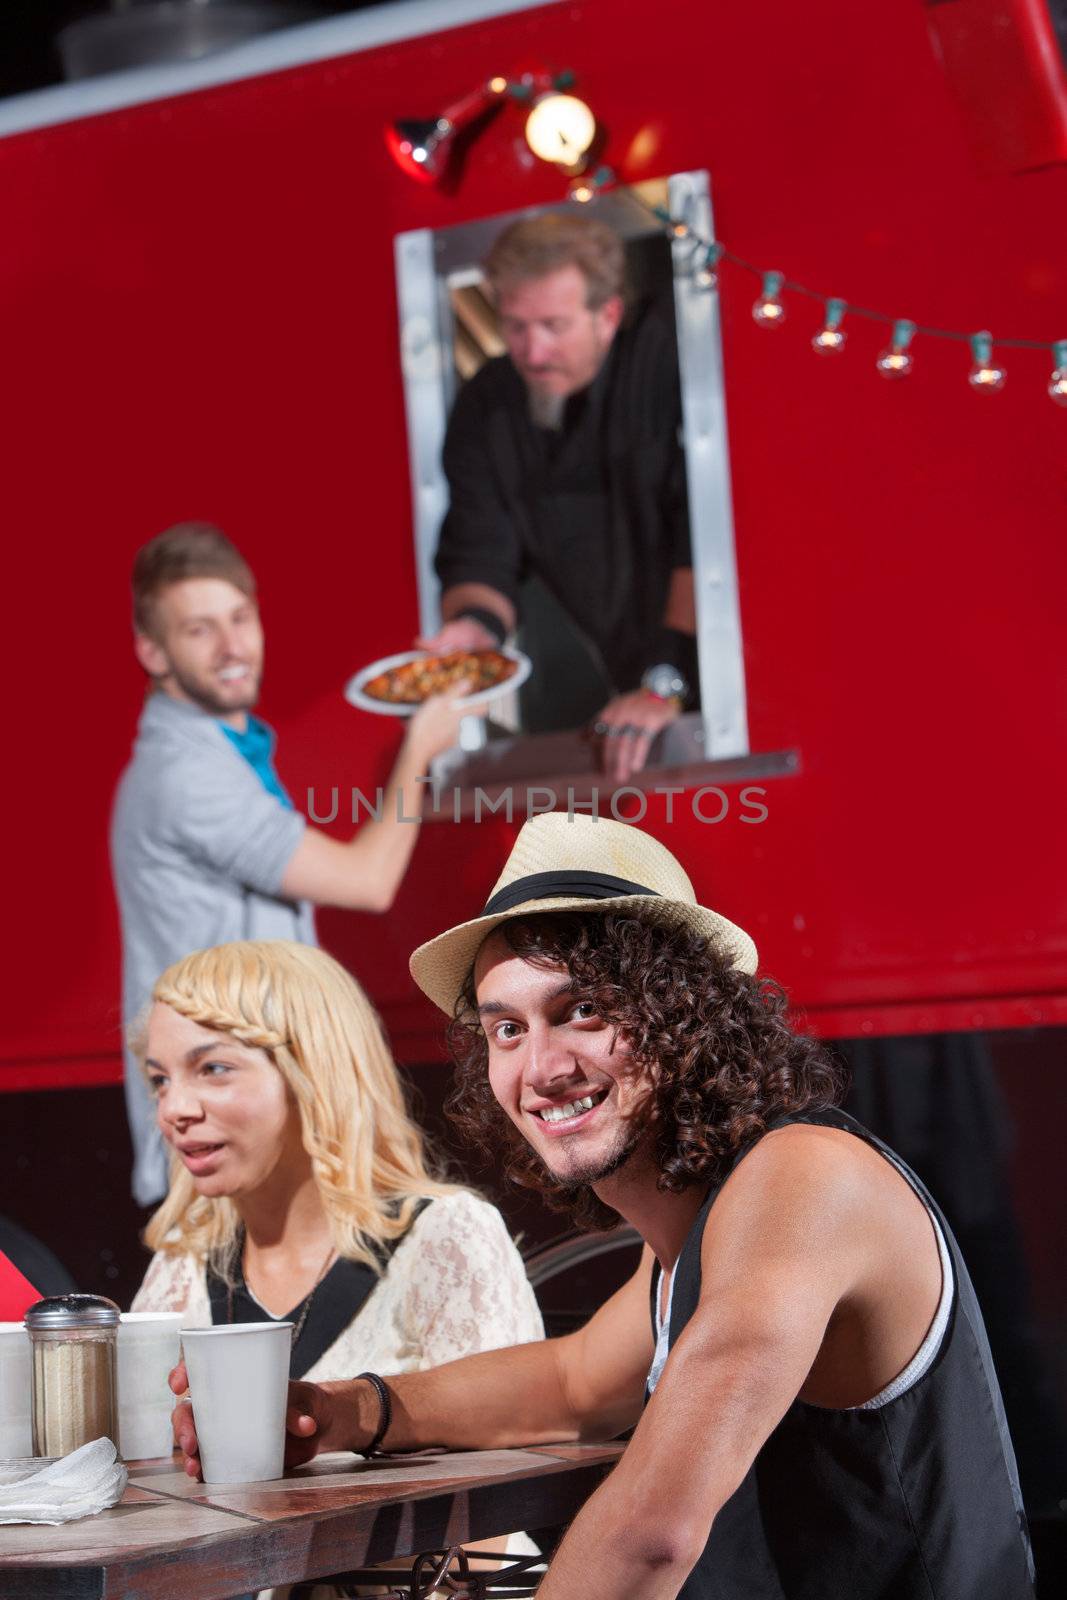 Smiling Man with Friends at Food Truck by Creatista